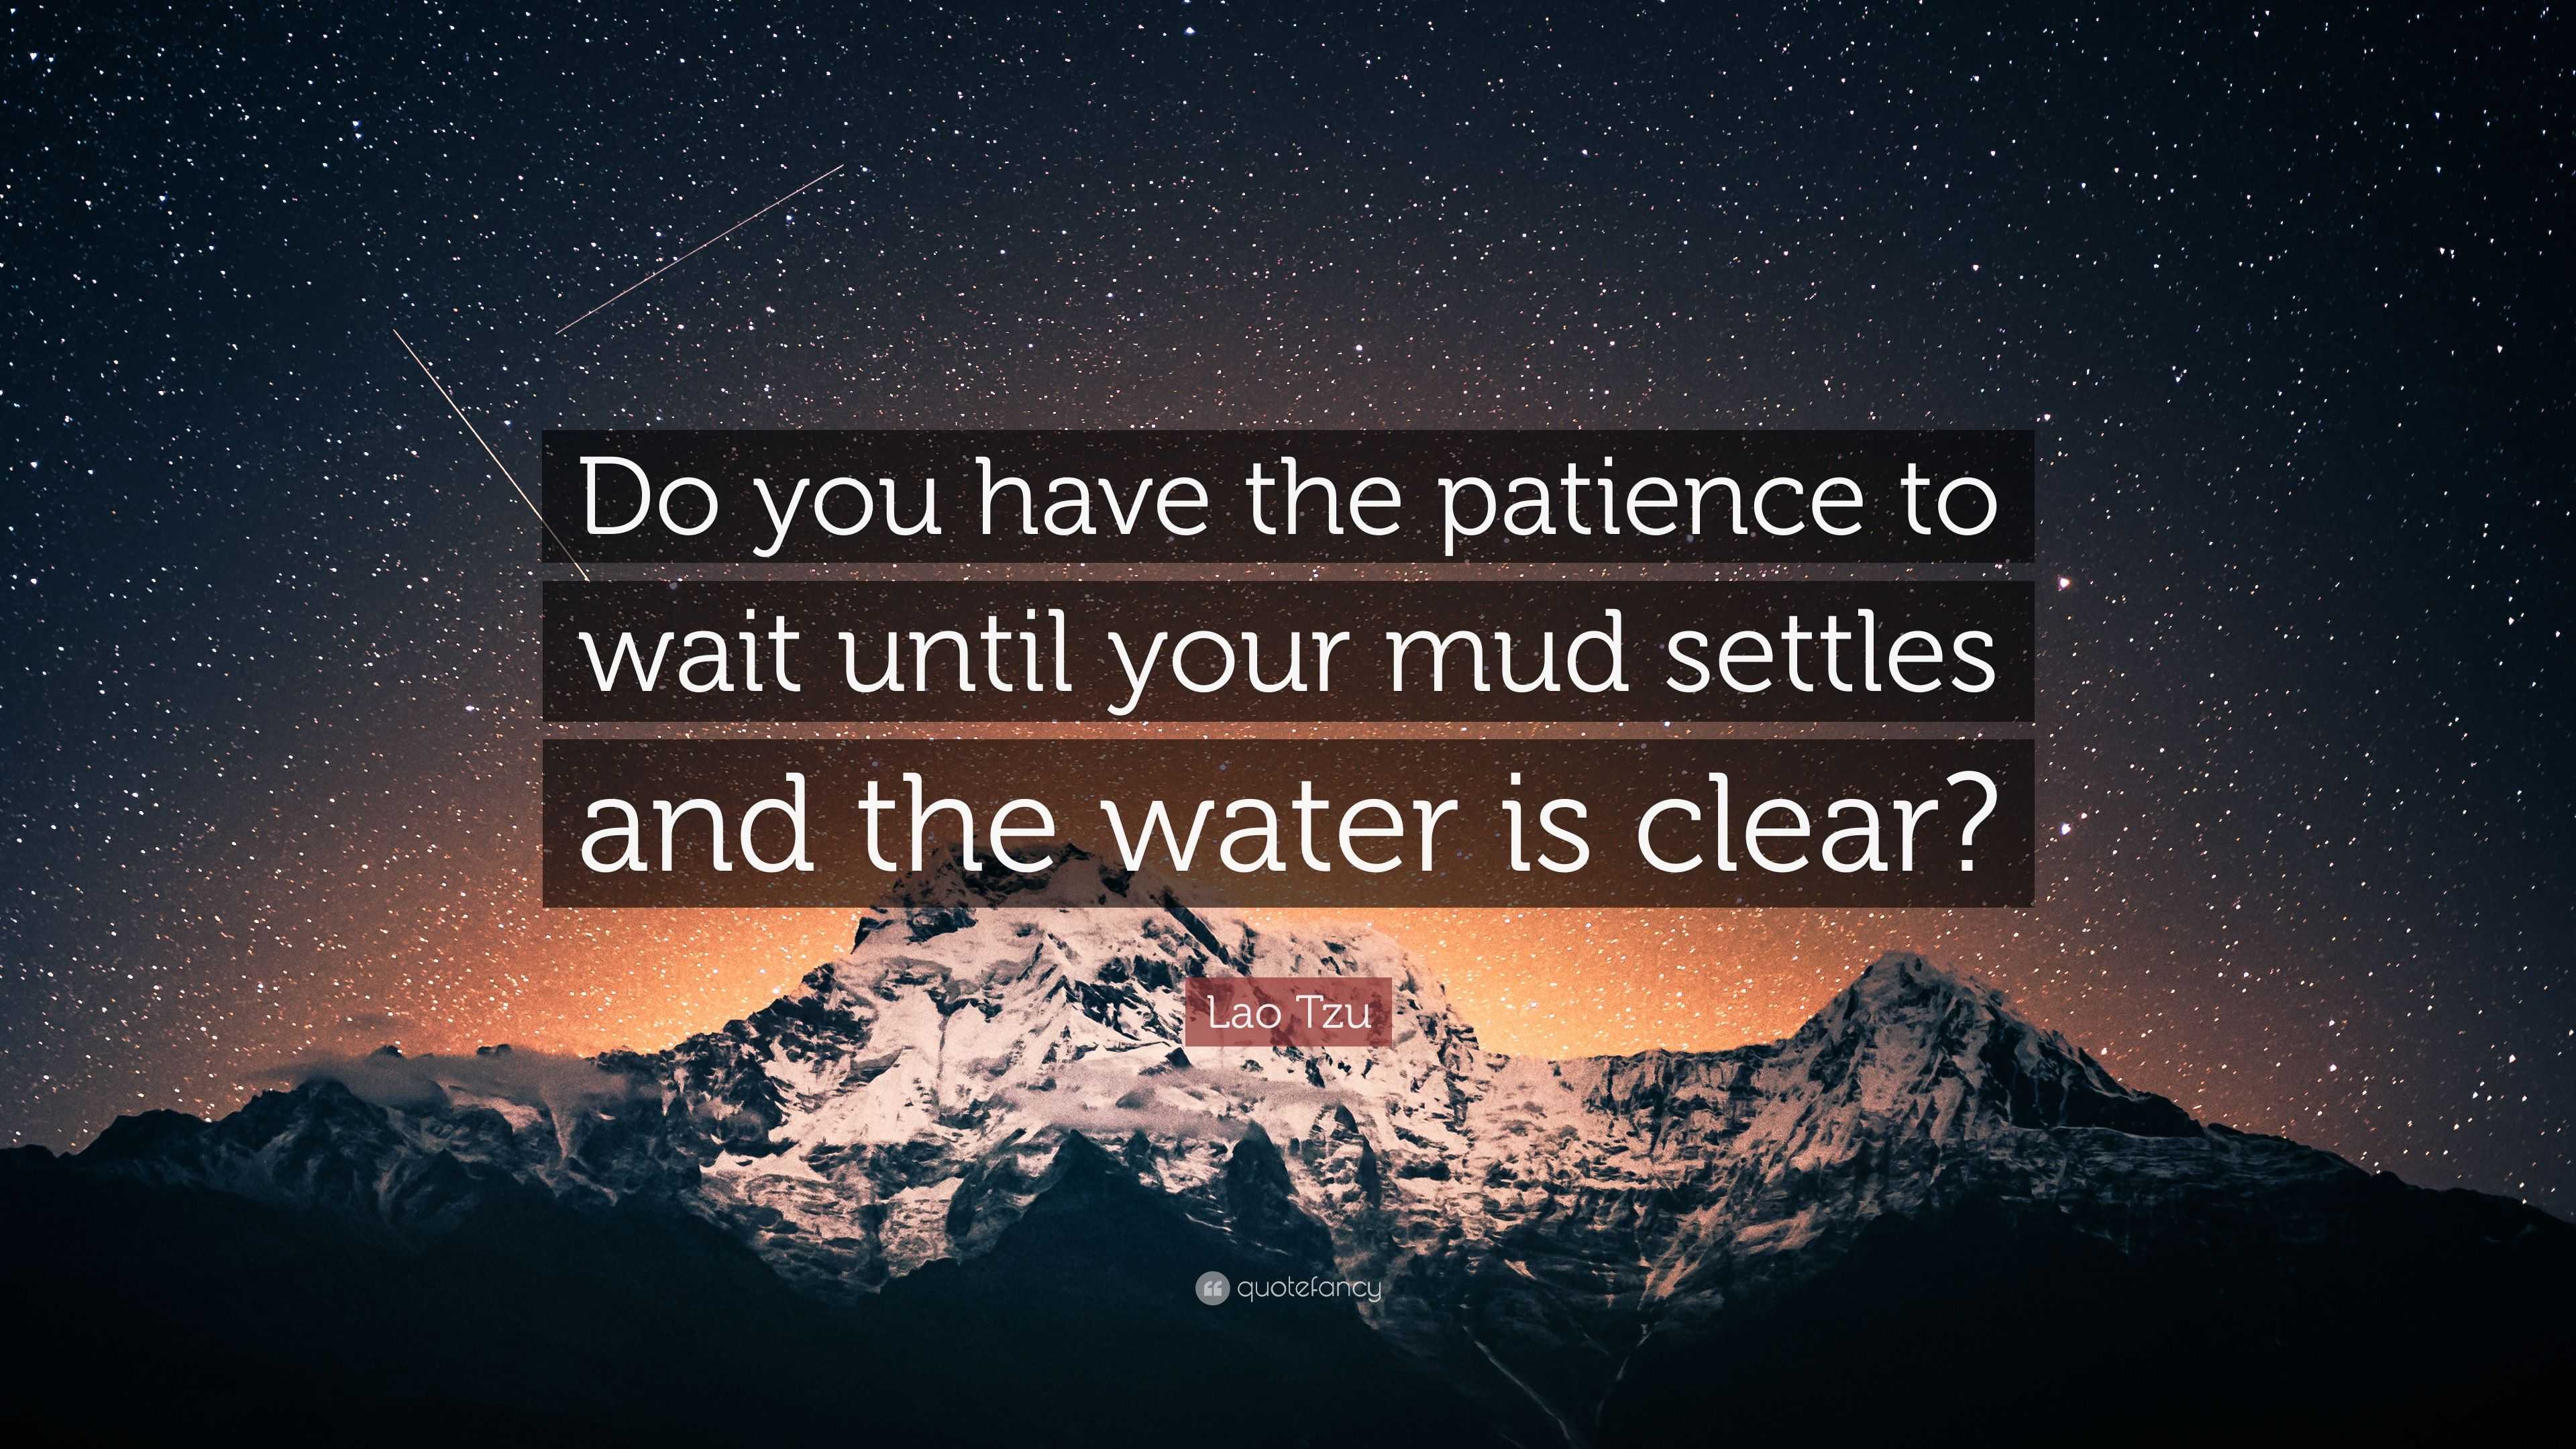 Lao Tzu Quote: "Do you have the patience to wait until your mud settles and the water is clear?"